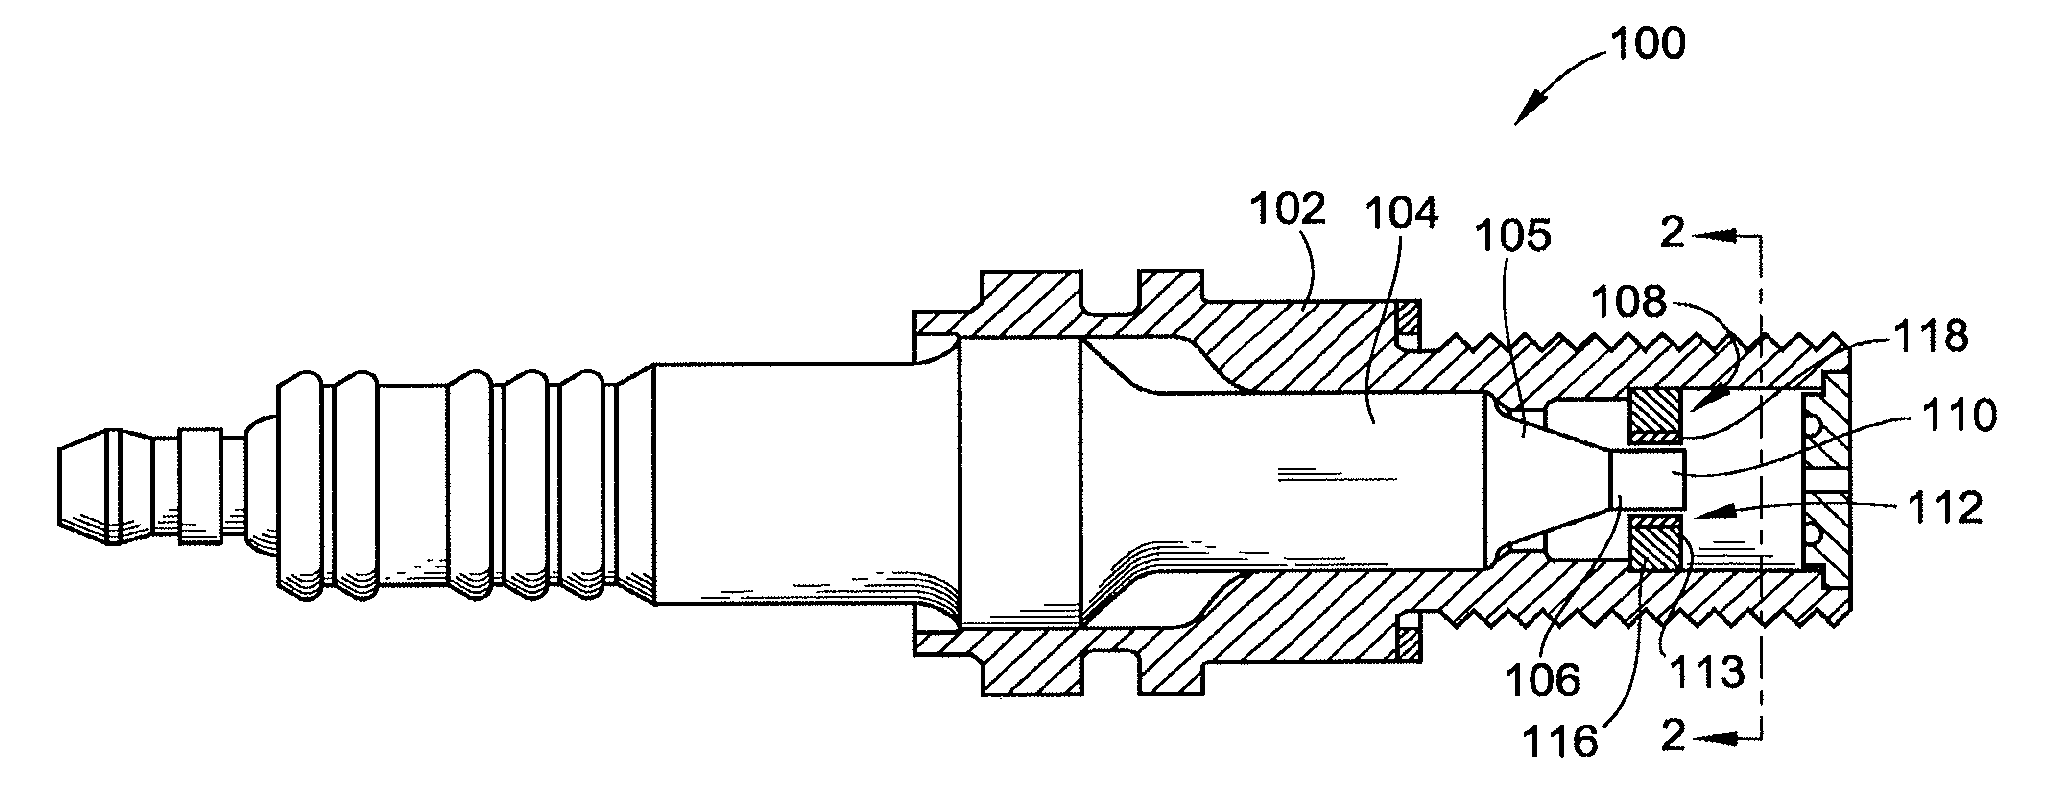 Pre-Chamber Spark Plug and Electrodes Therefor